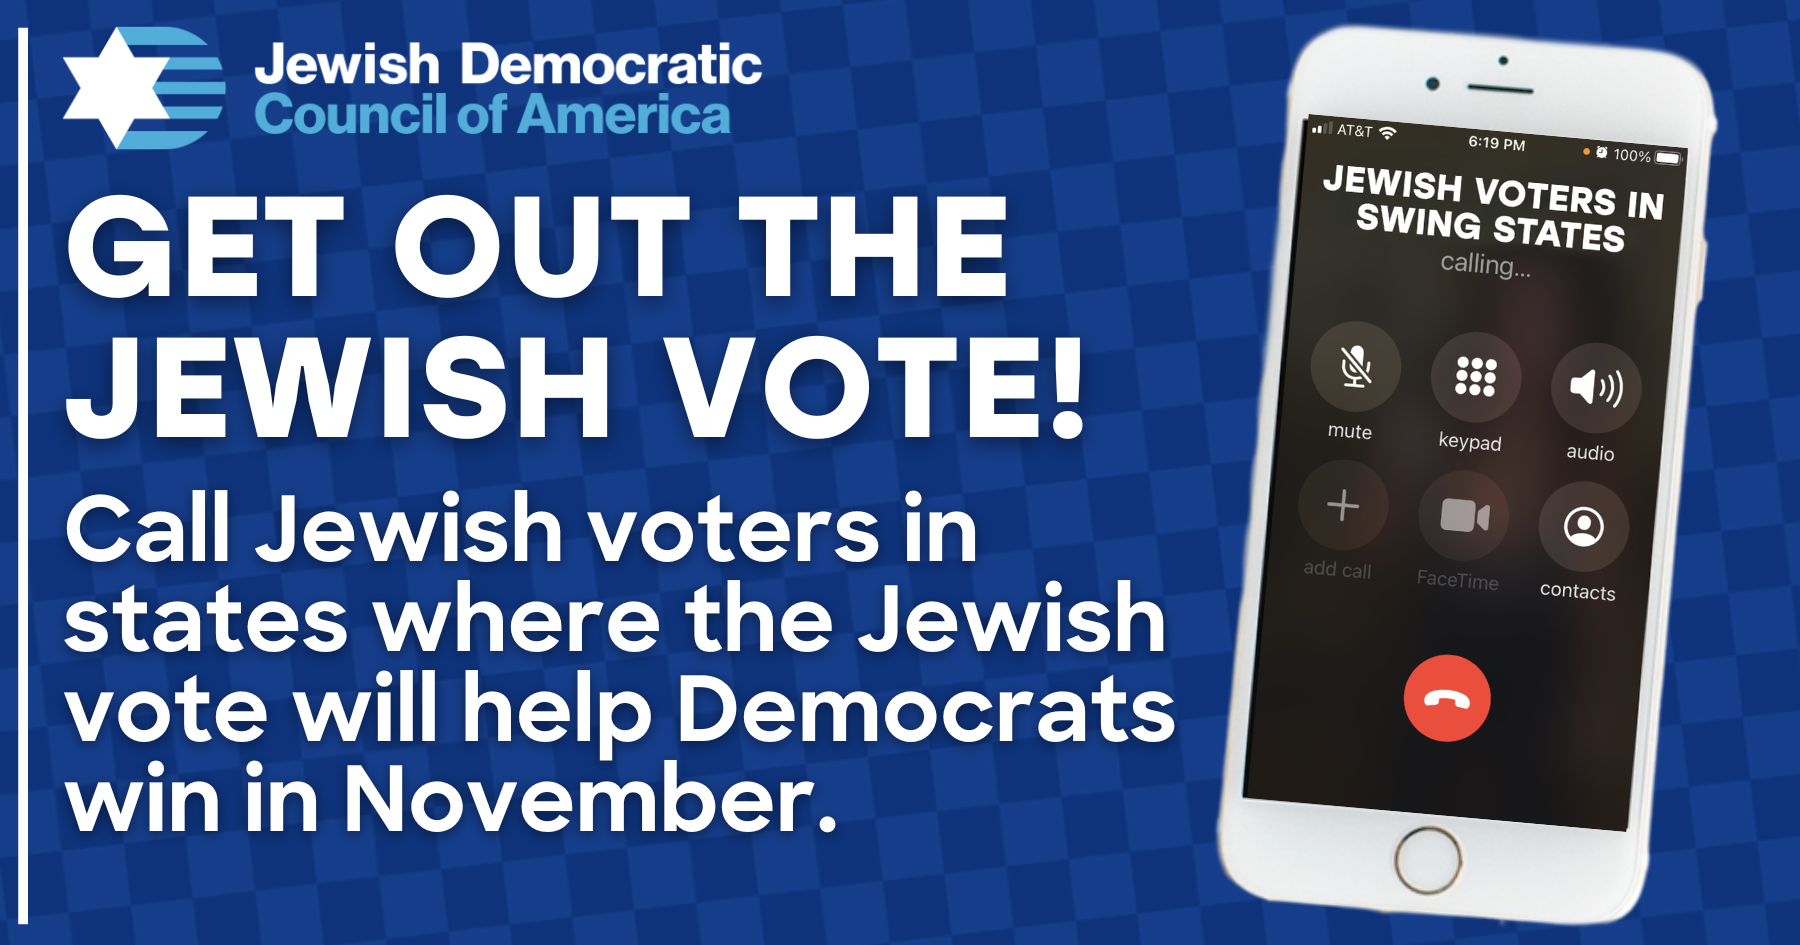 Get Out the Jewish Vote! Call Jewish voters in states where the Jewish vote will help Democrats win in November.